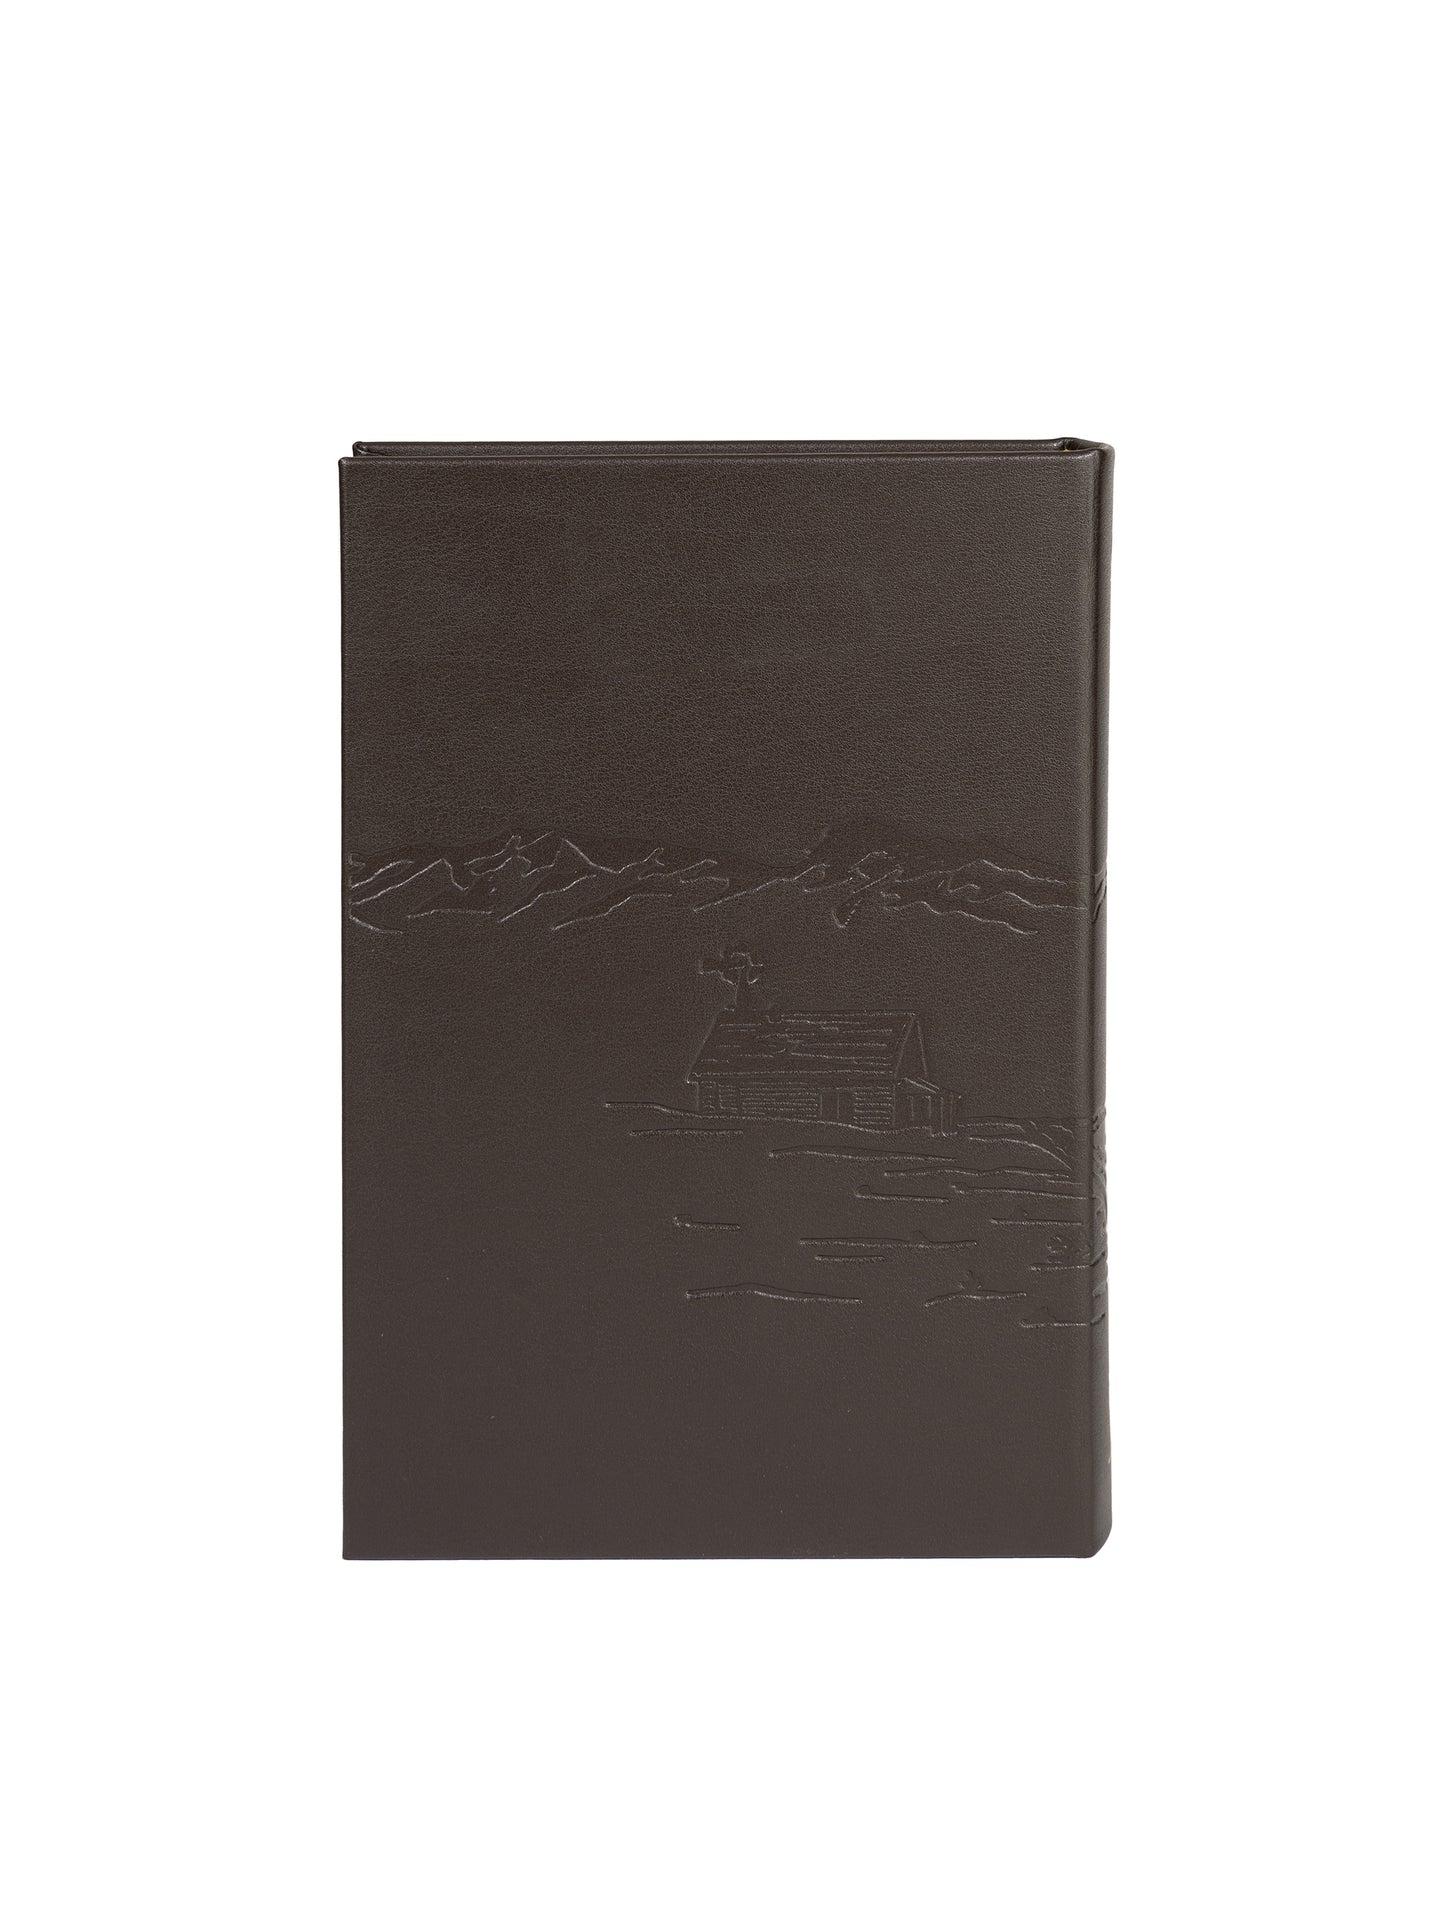 The Grapes of Wrath Leather Bound Edition